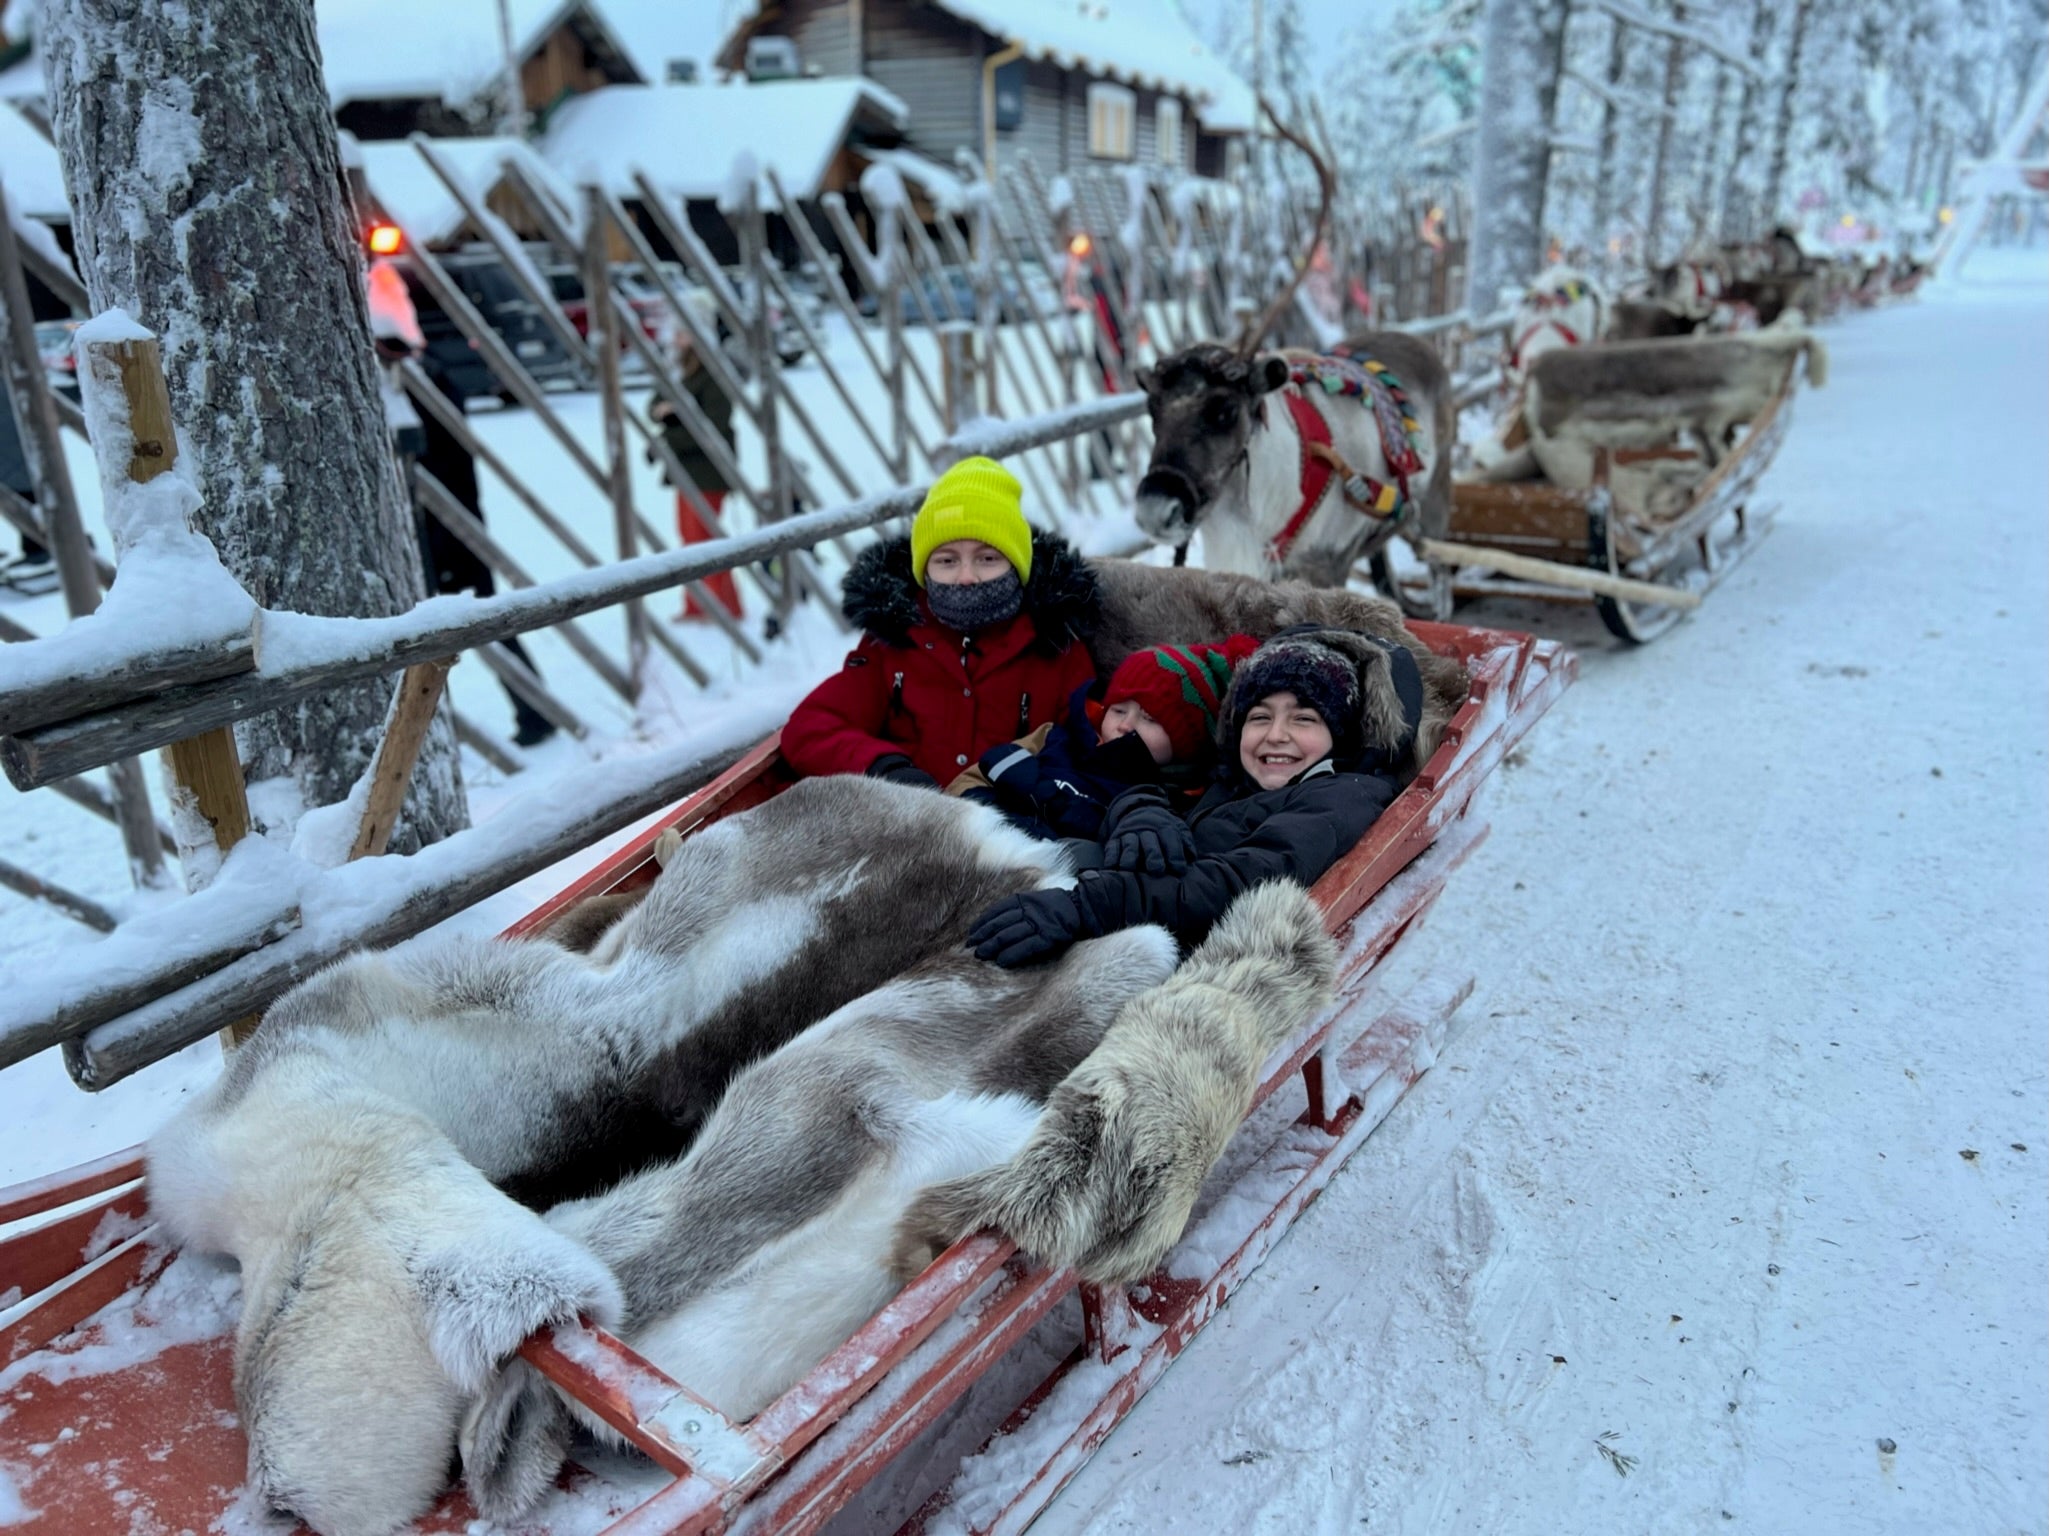 Maisie, Pippa and Marley in a toboggan in Lapland, December 2022.